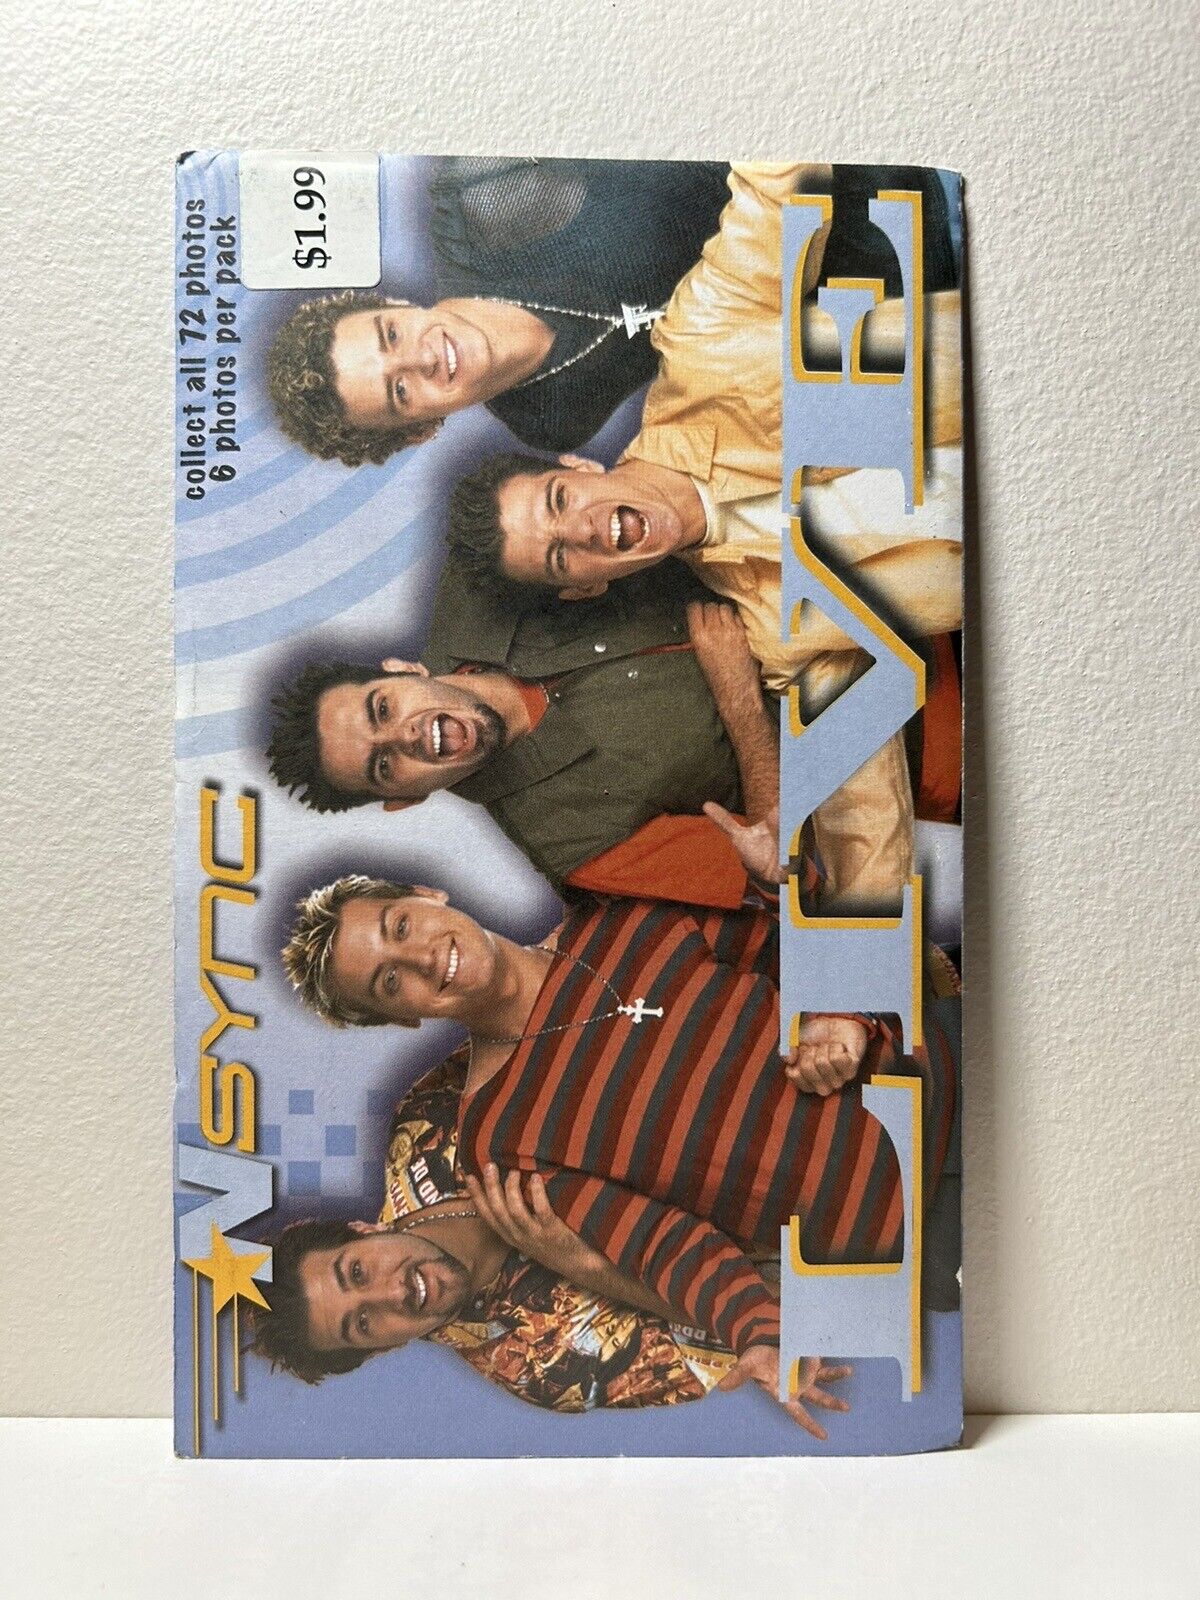 2000 Panini NSYNC LIVE Official Photocards Pack 90s Nostalgia - Sealed